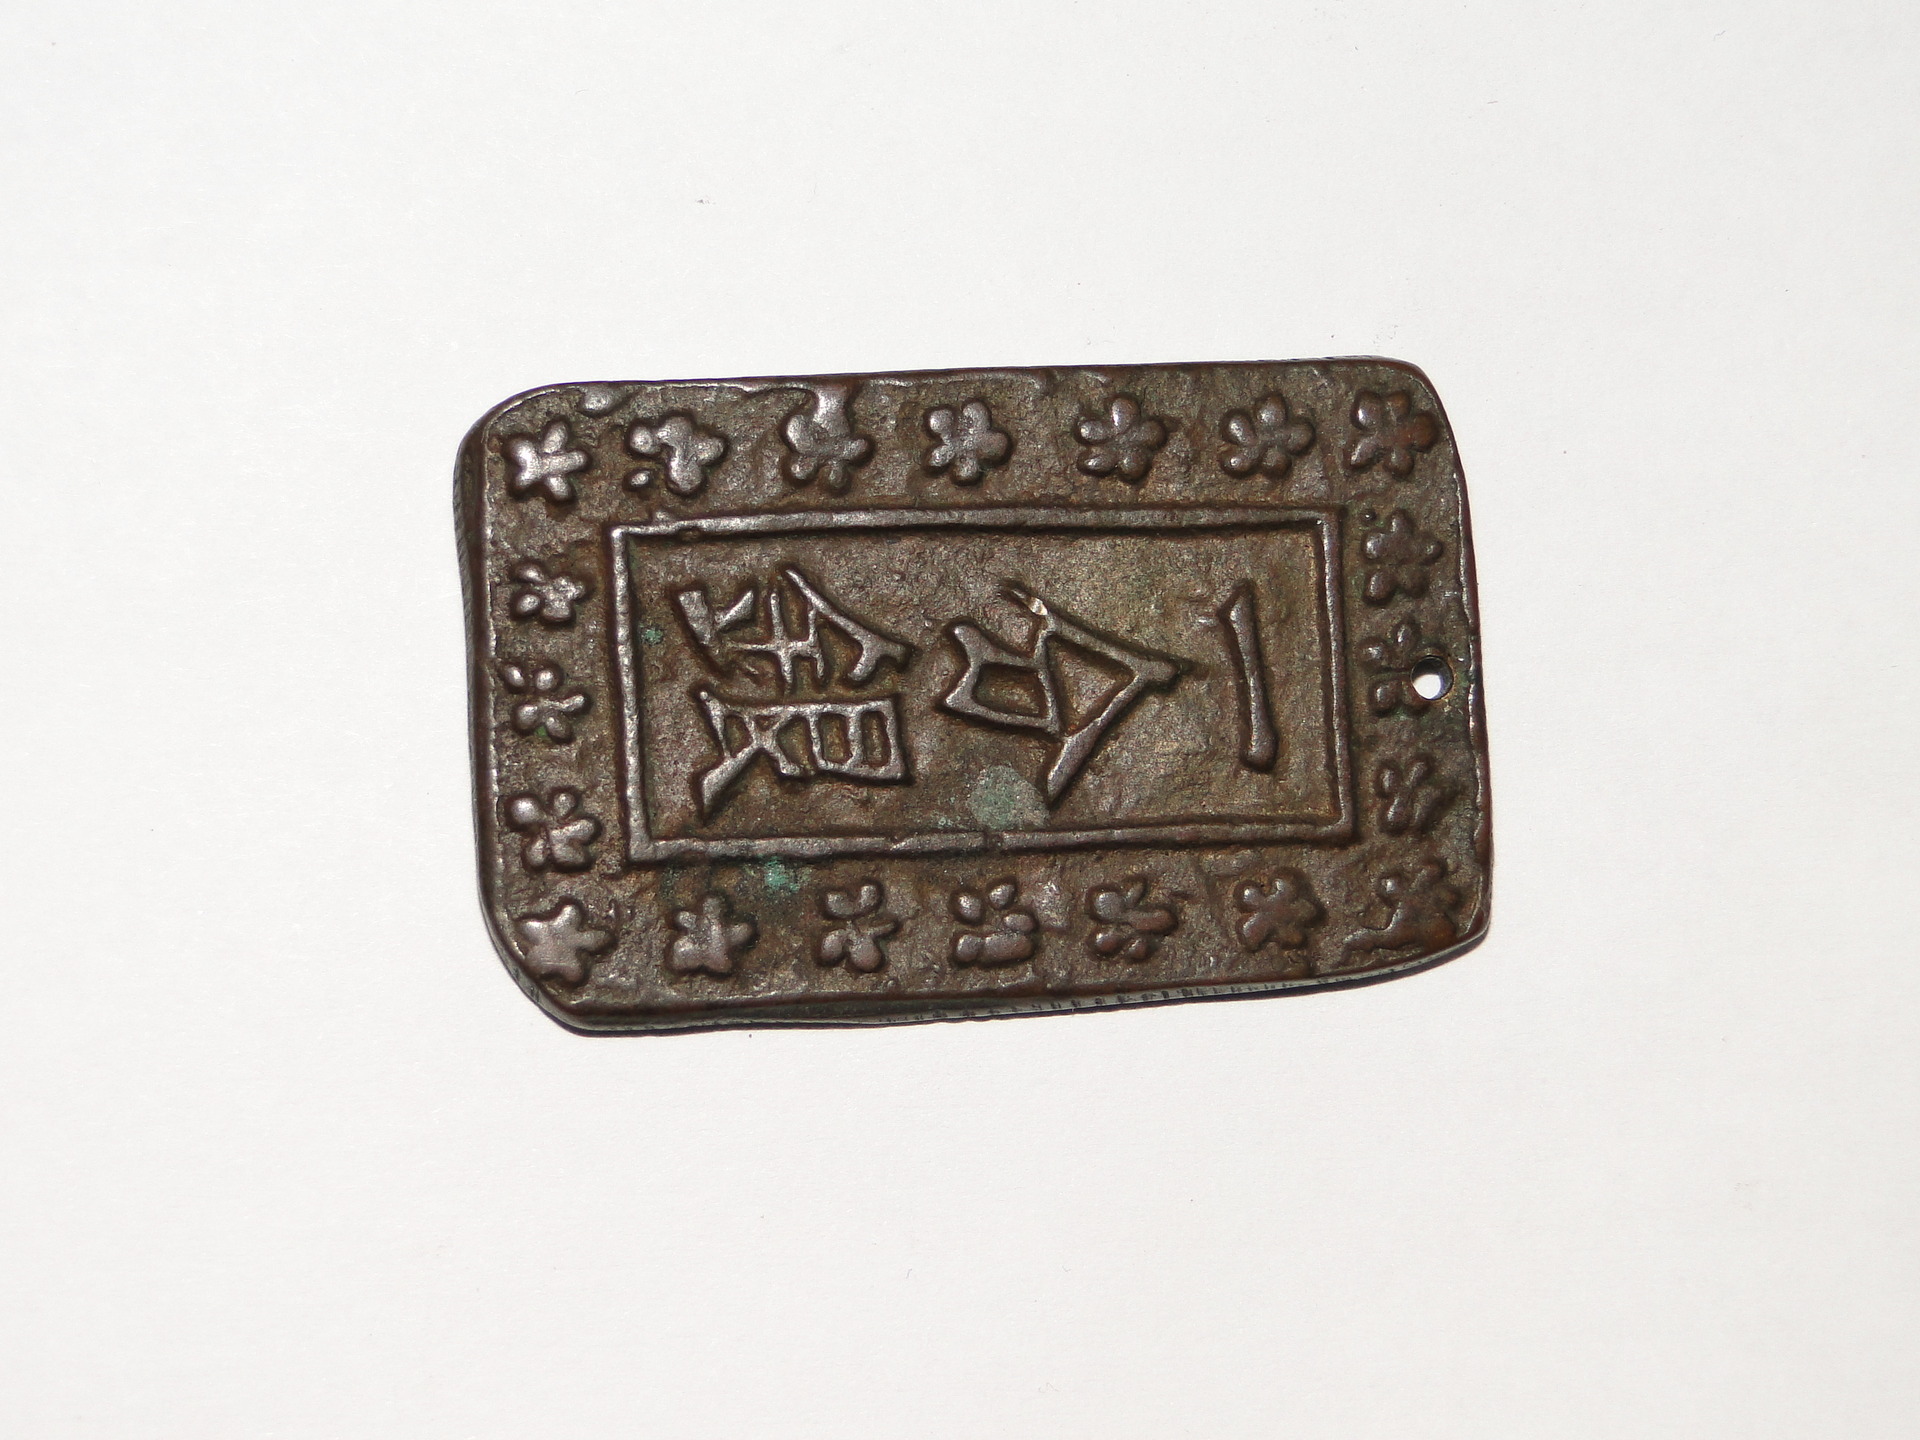 Ancient Extremely Old Square Asian Coin? Help Please ...